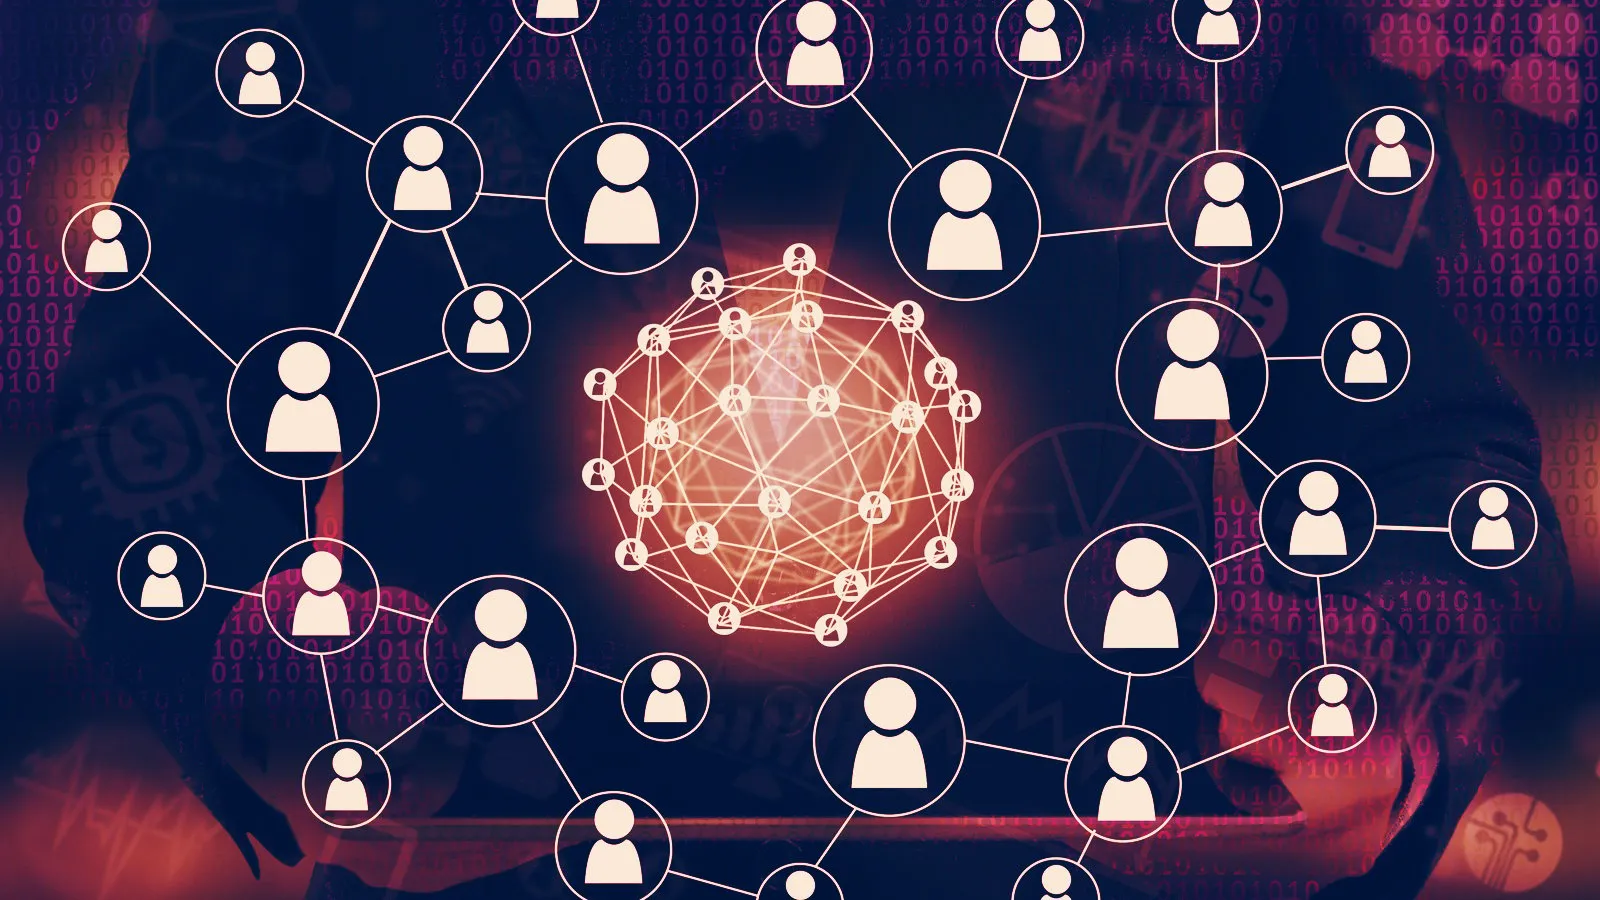 DChat, a decentralized chat protocol, launches. Image: Shutterstock